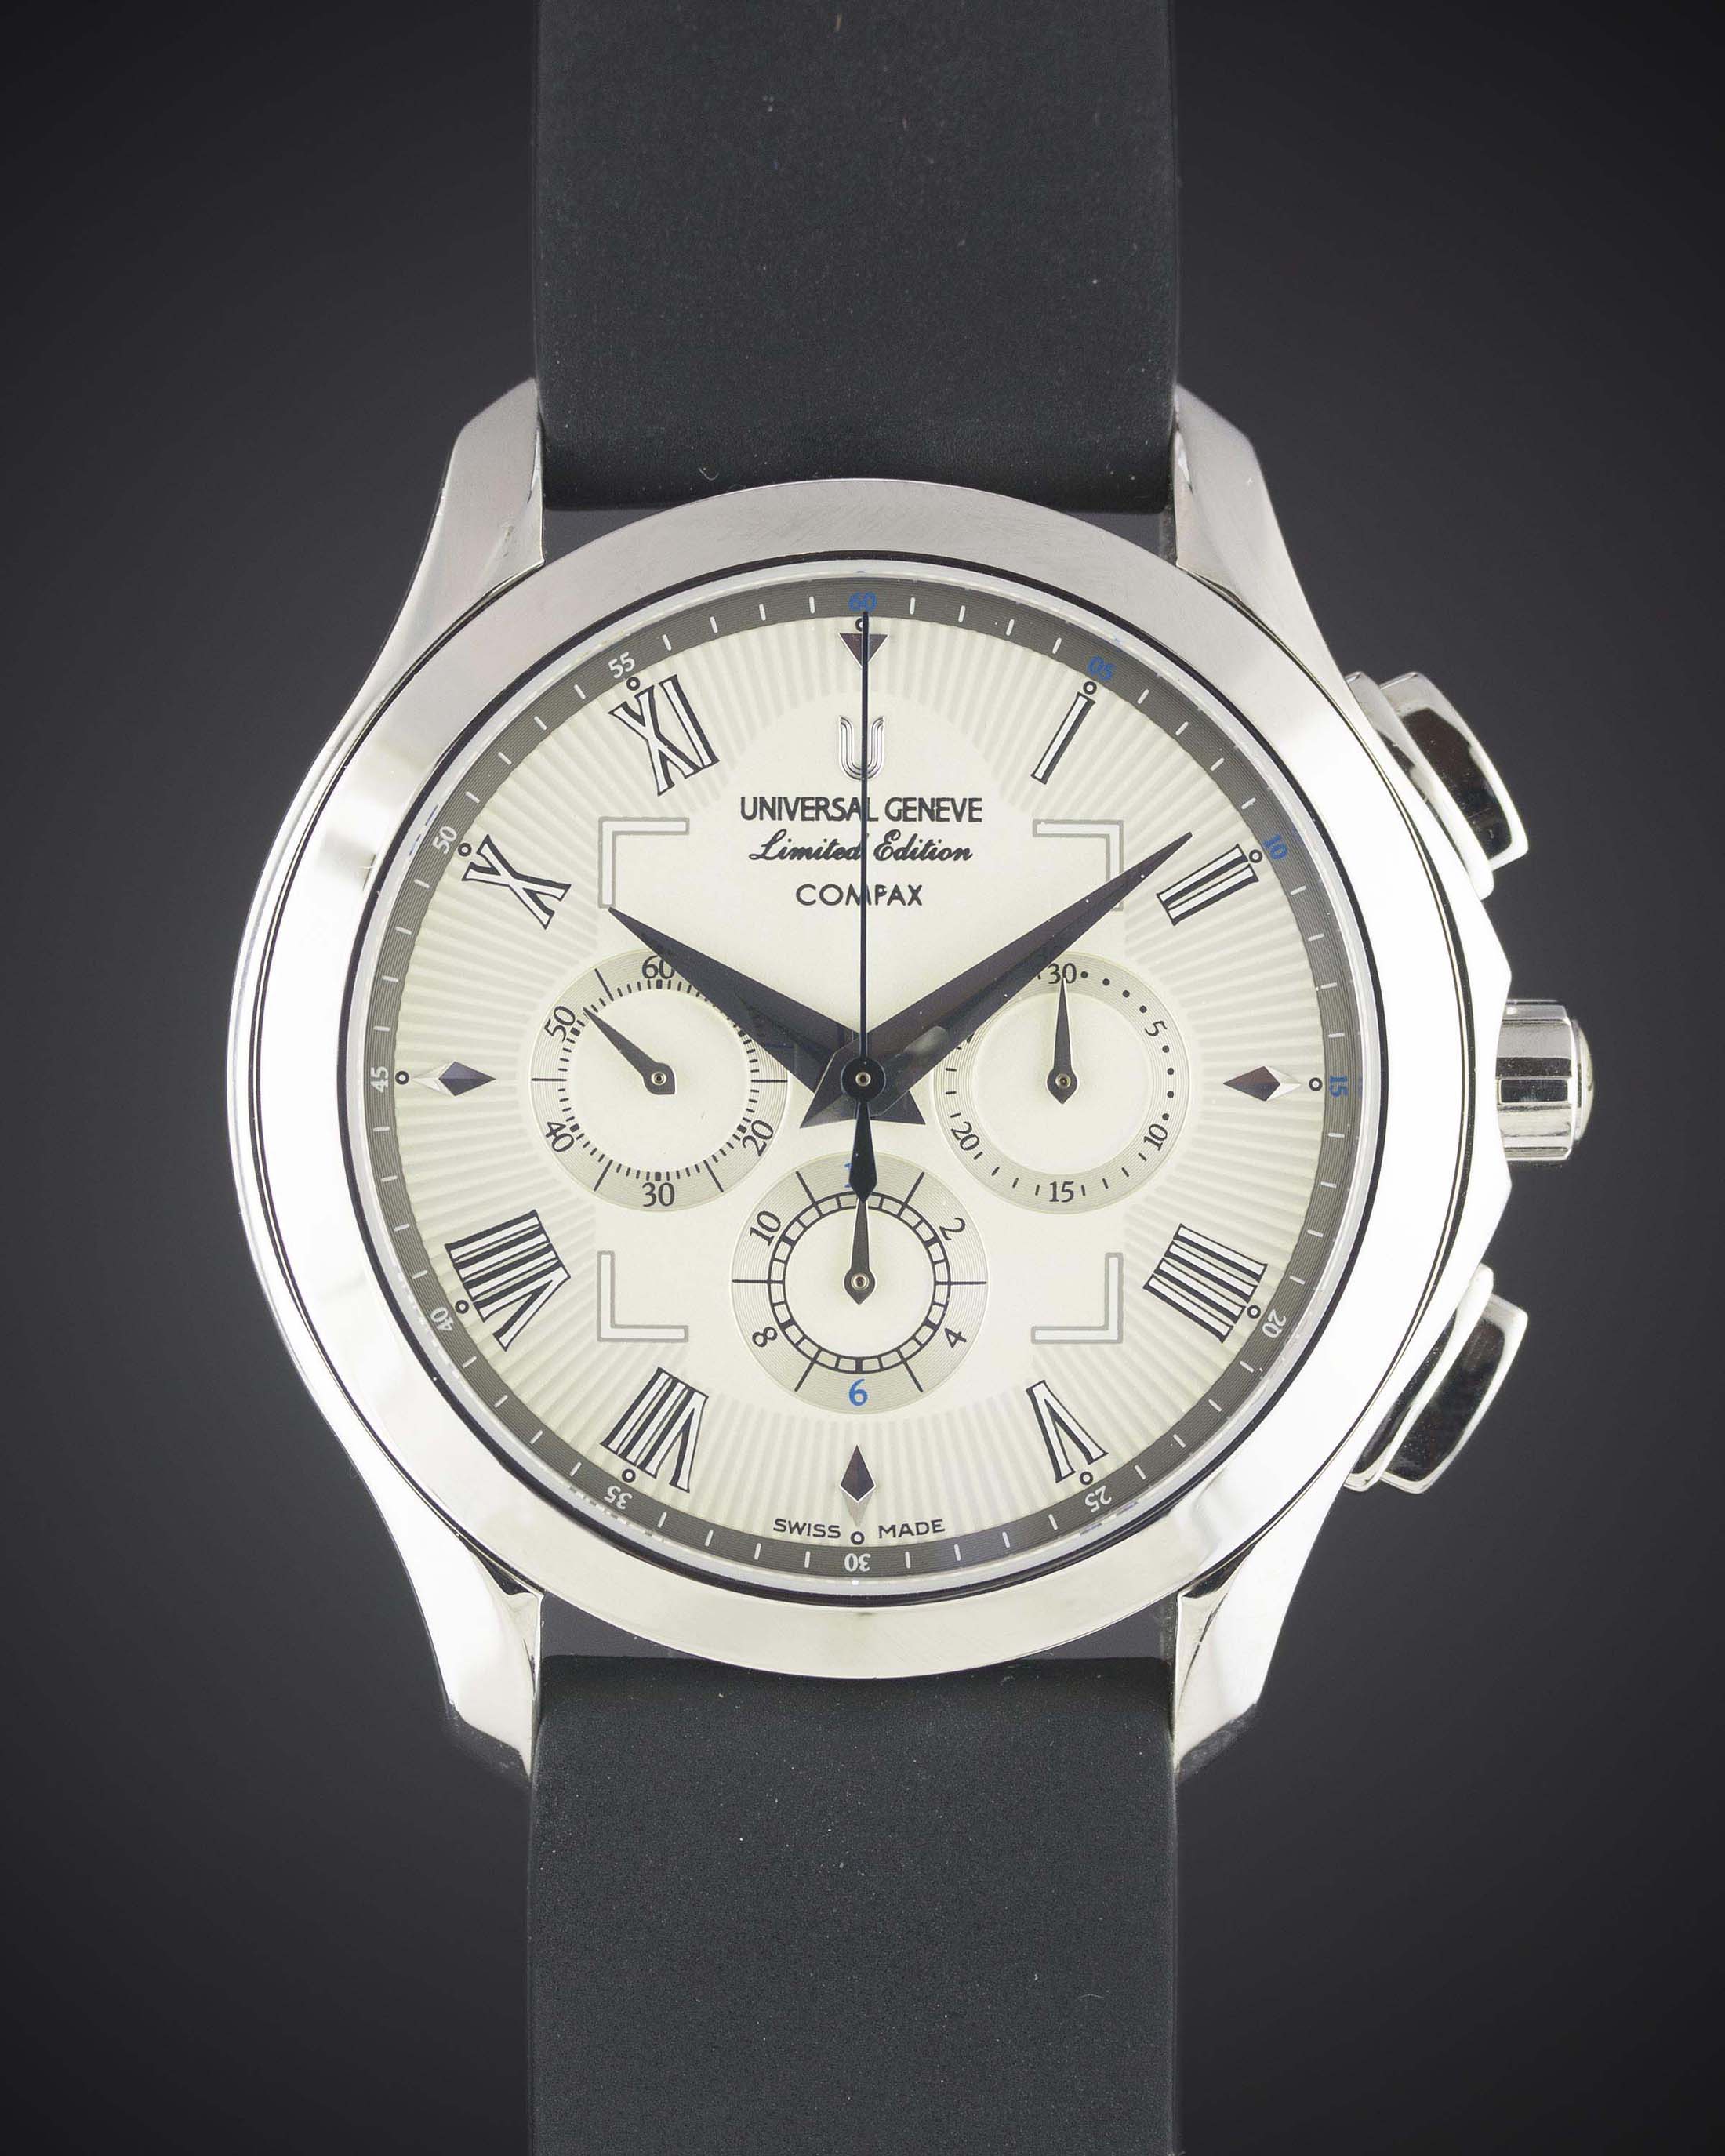 A RARE GENTLEMAN'S STAINLESS STEEL UNIVERSAL GENEVE LIMITED EDITION COMPAX CHRONOGRAPH WRIST WATCH